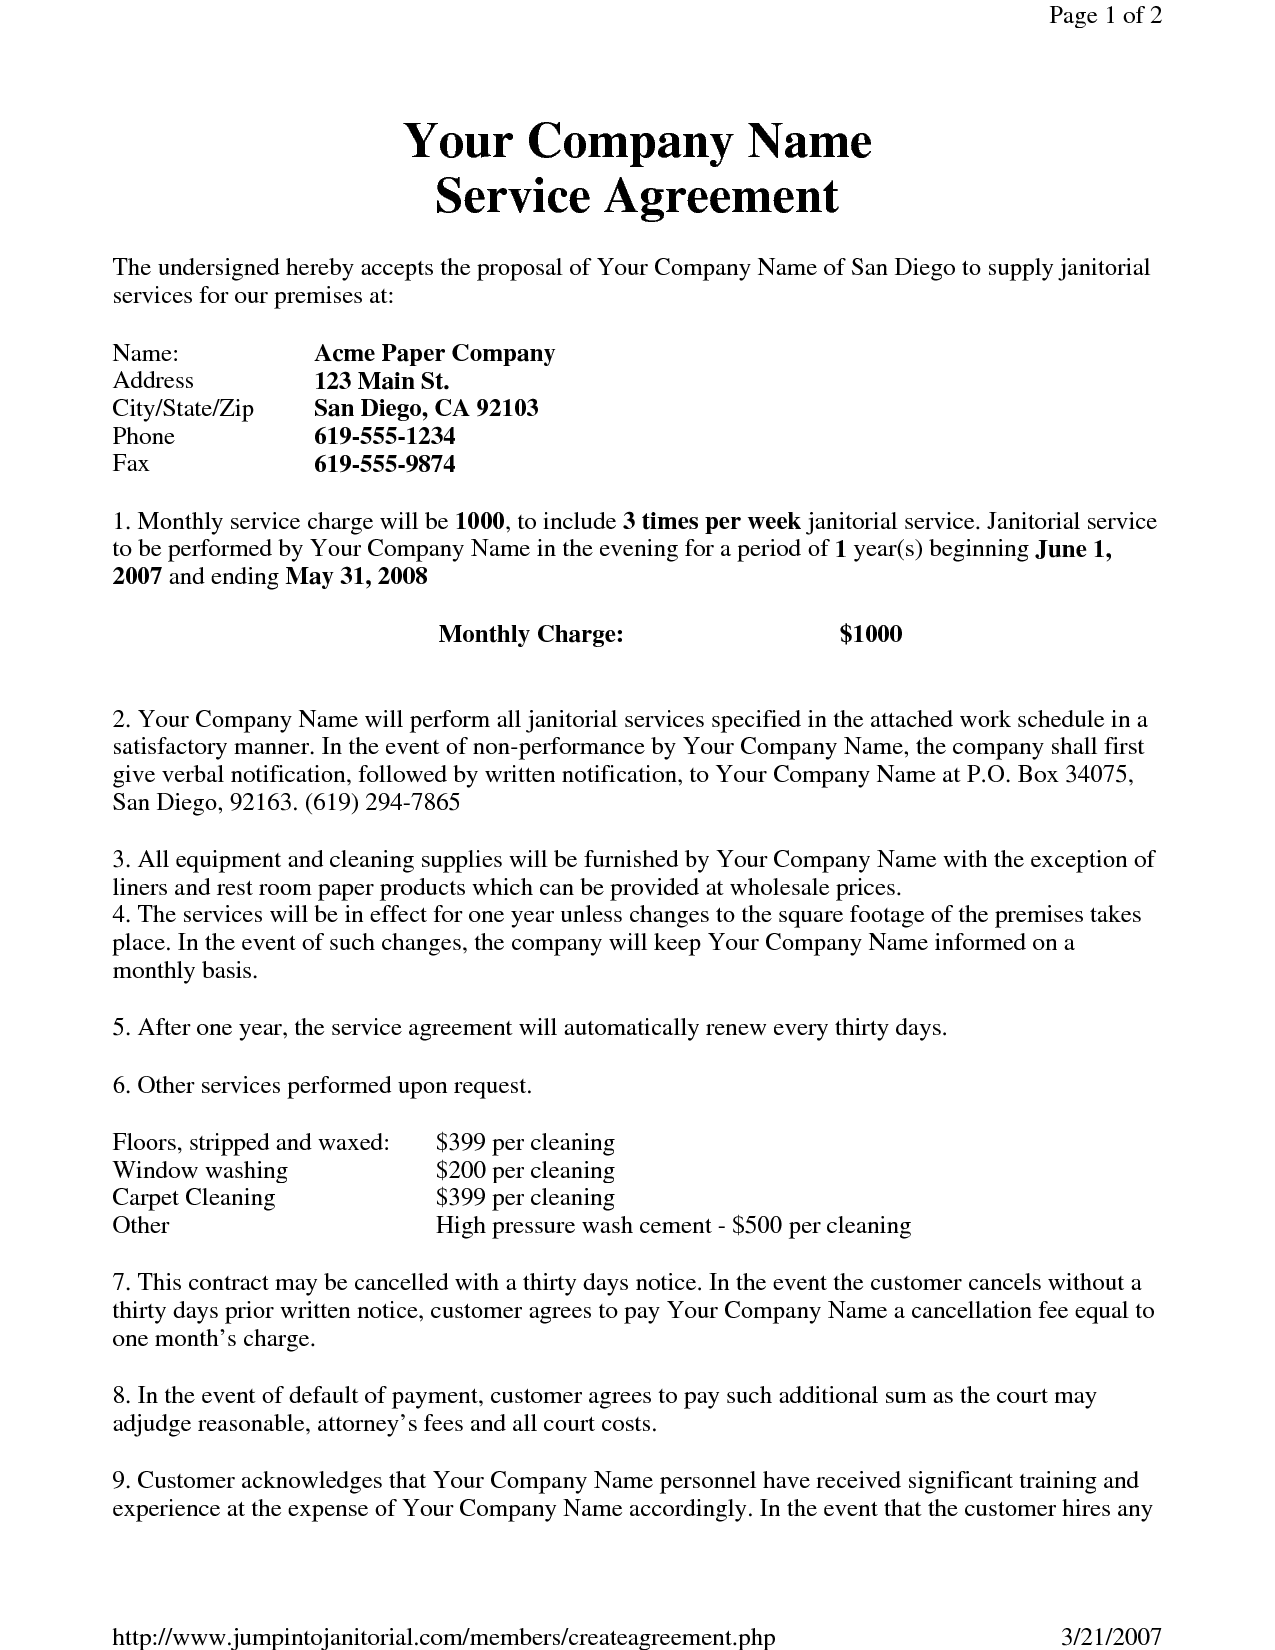 Server Build Document Template - loptecigar For commercial cleaning service agreement template